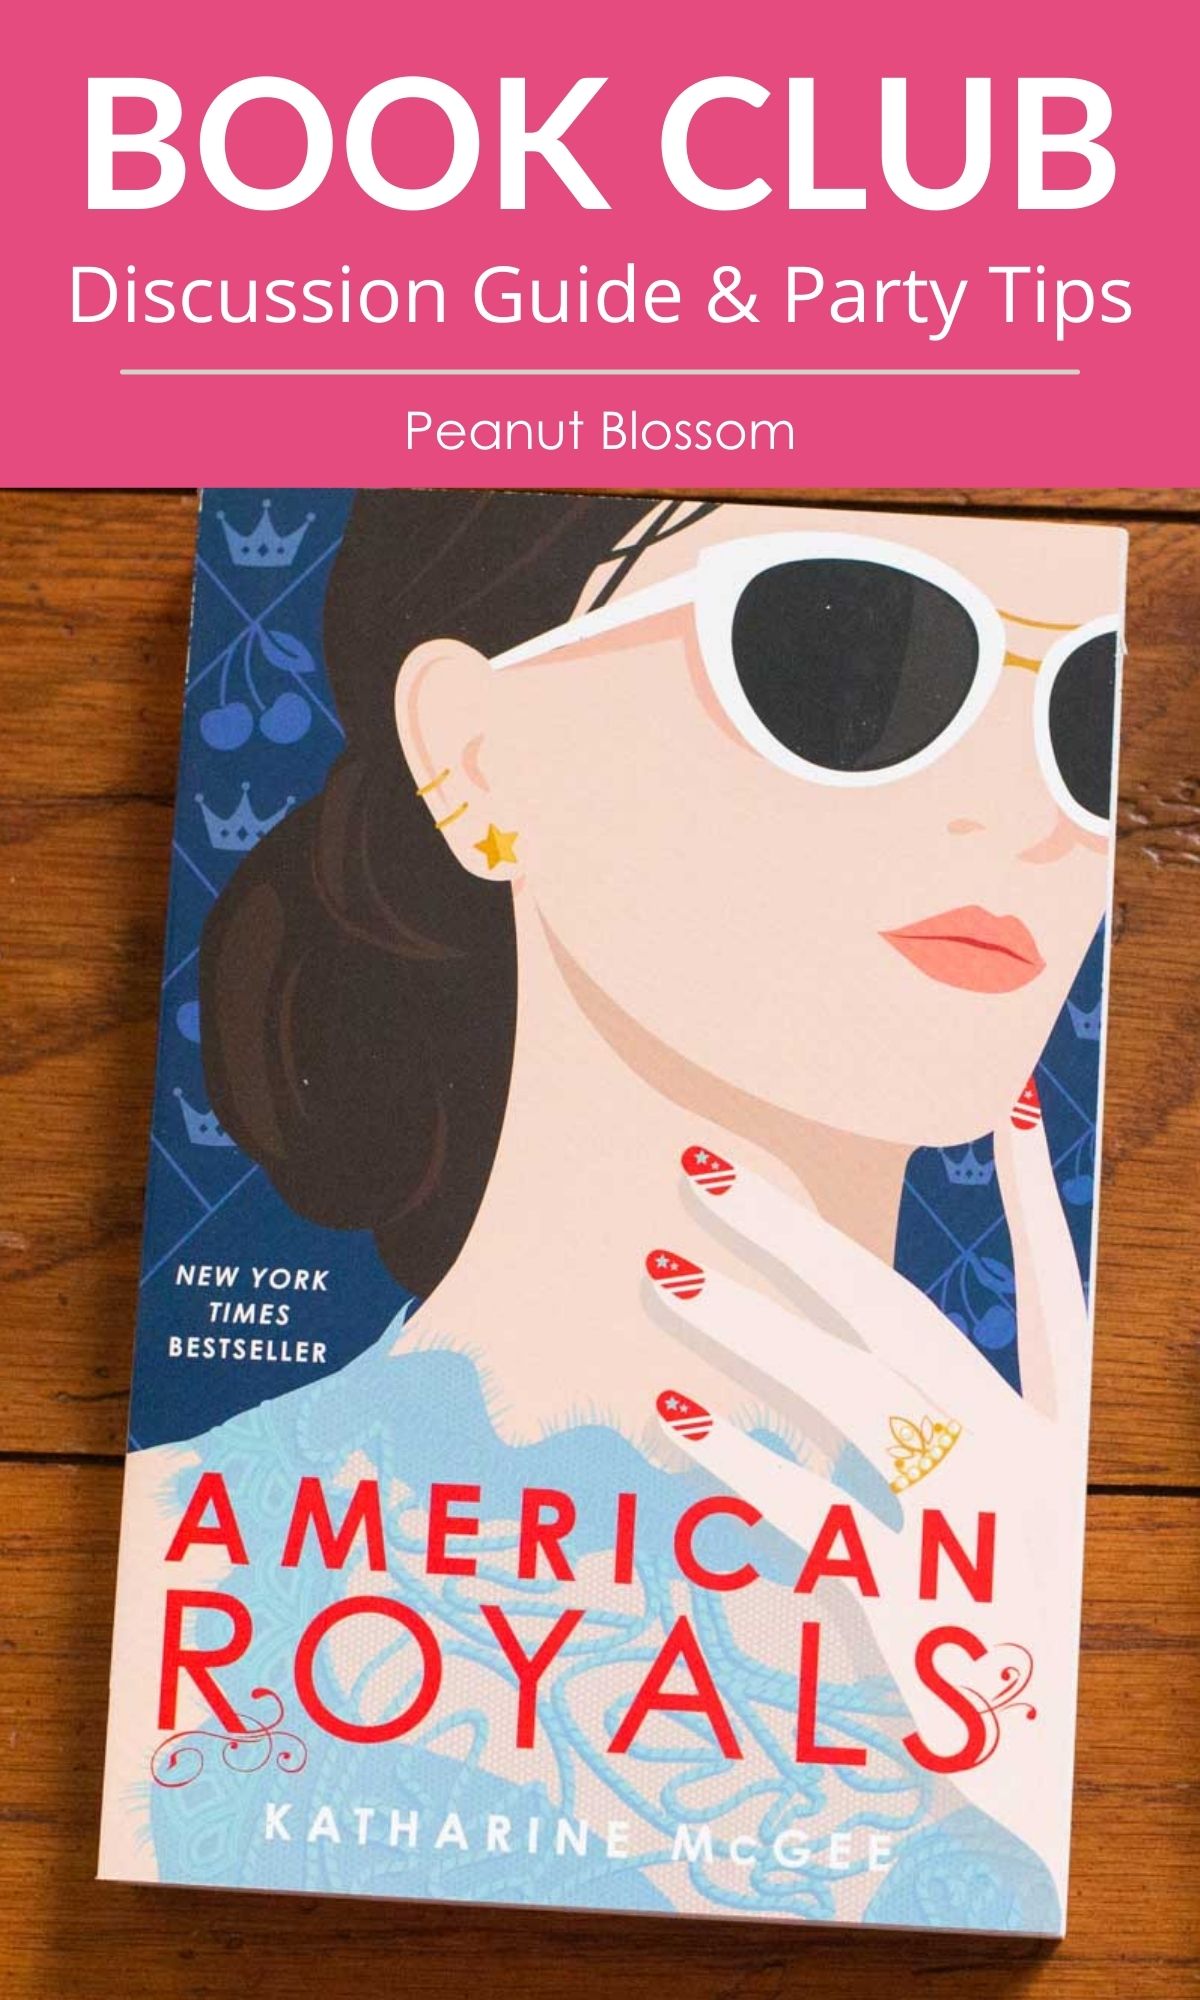 A copy of American Royals by Katharine McGee is a book club pick.